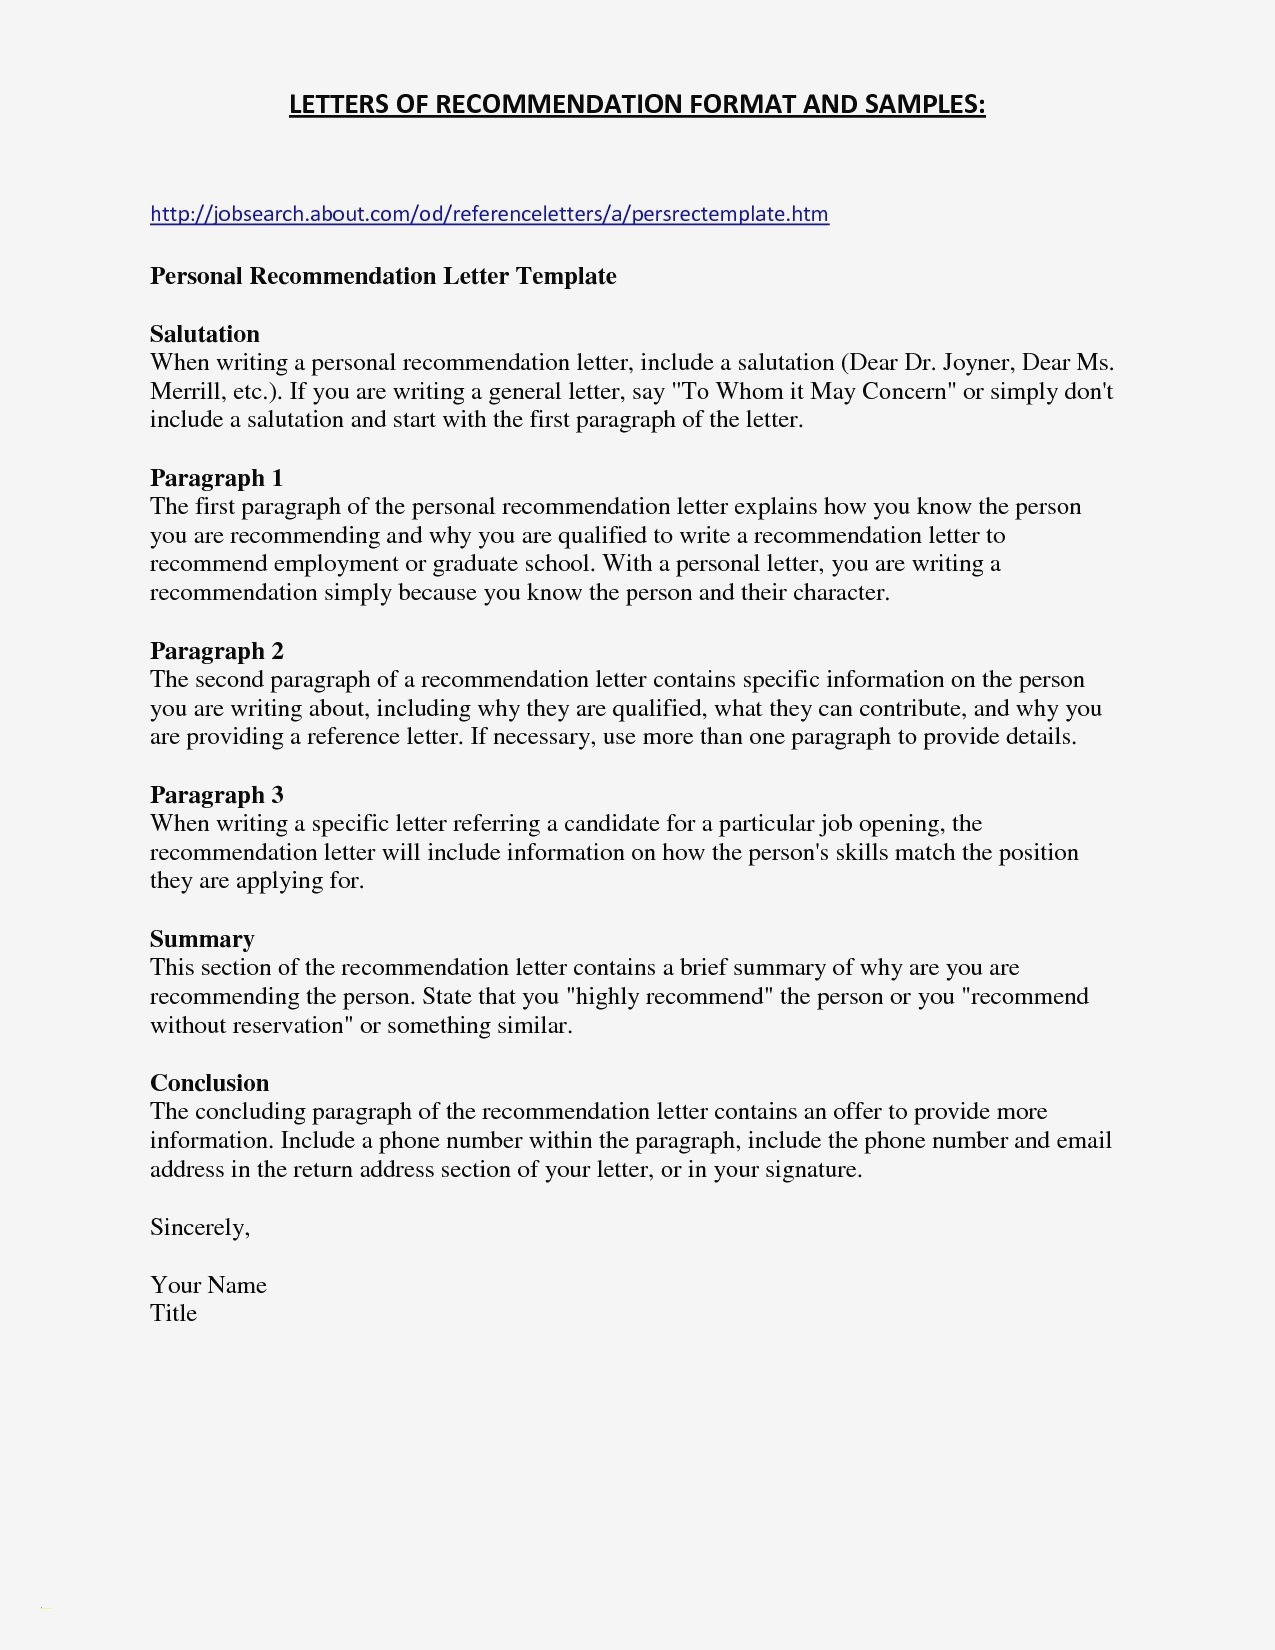 Hbs Letter Of Recommendation Menom with regard to dimensions 1275 X 1650